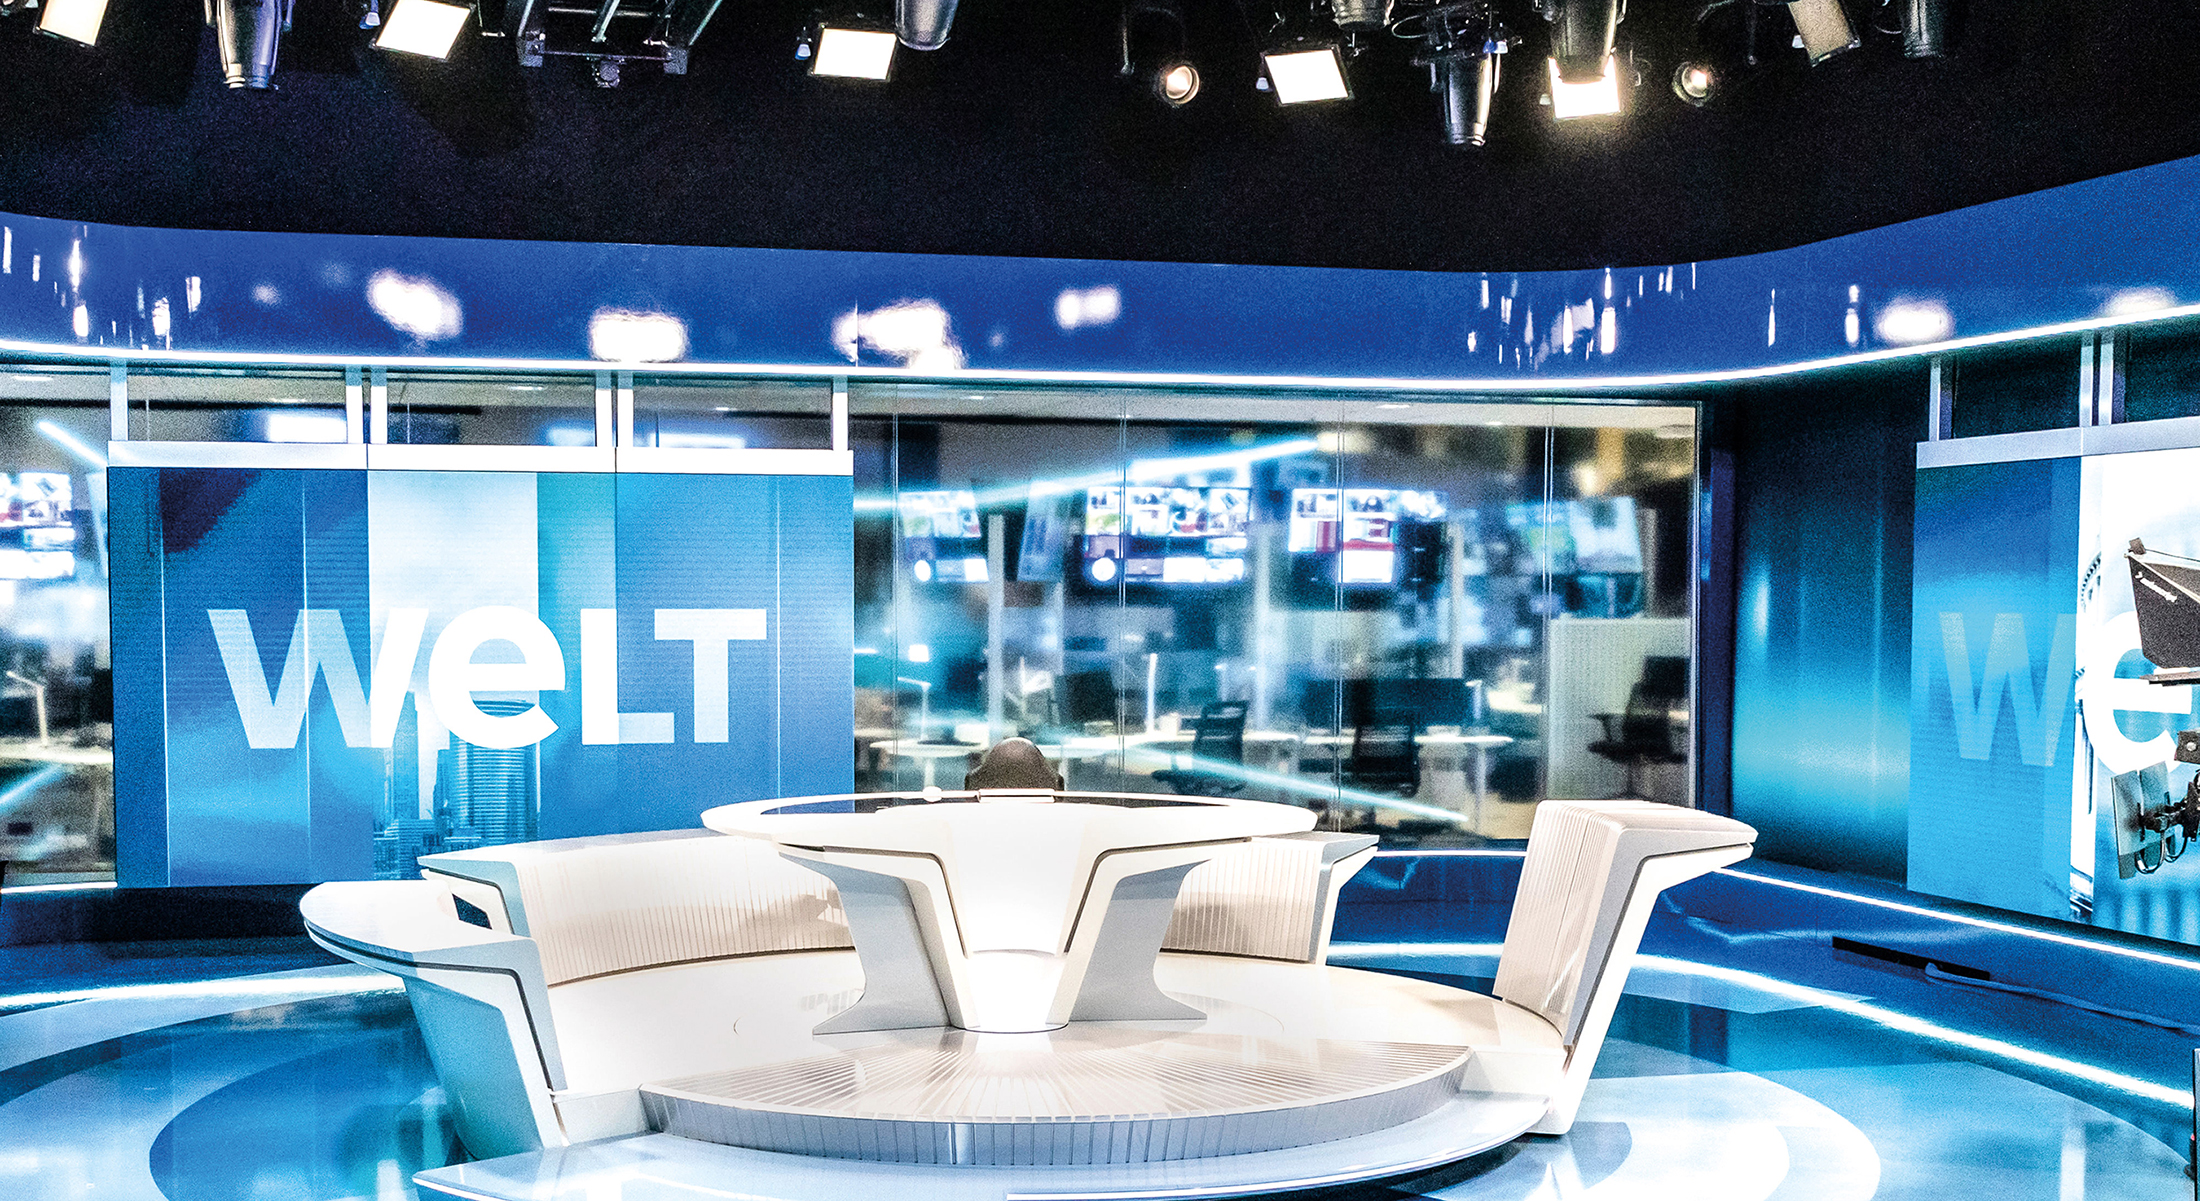 Arri equips state-of-the-art Welt TV studios entirely with ()